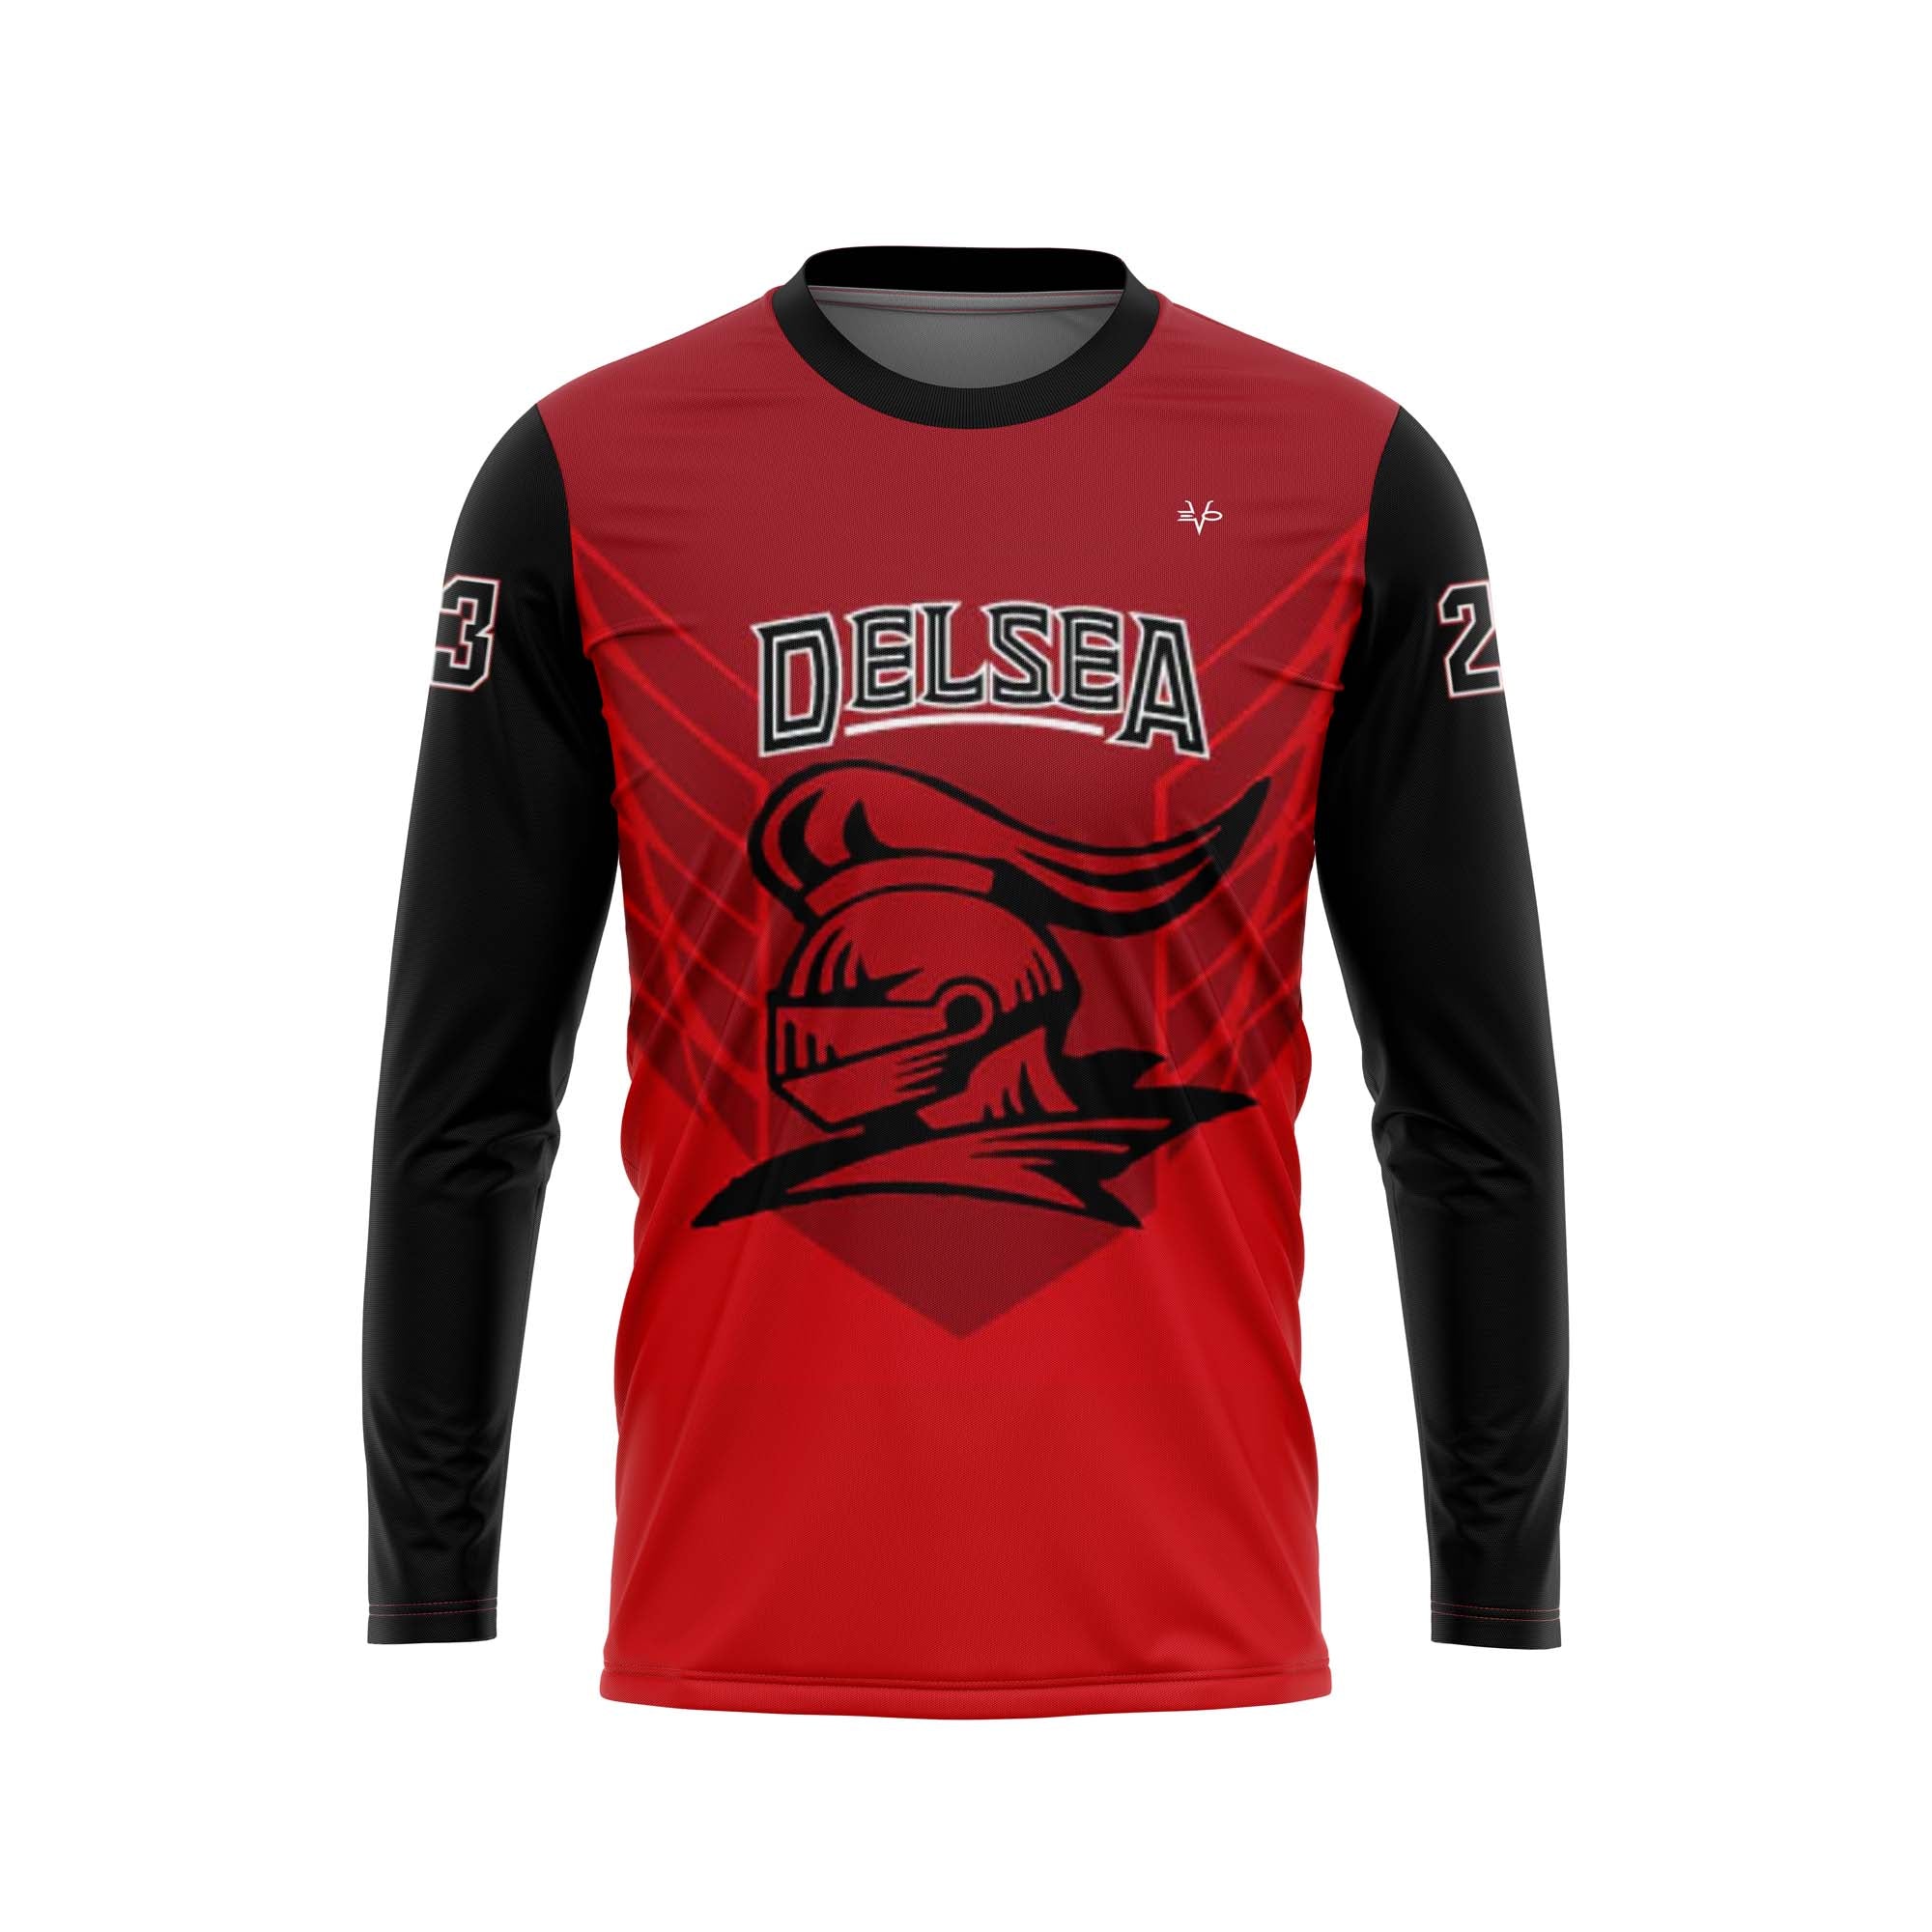 DELSEA KNIGHTS Football Sublimated Long Sleeve Jersey